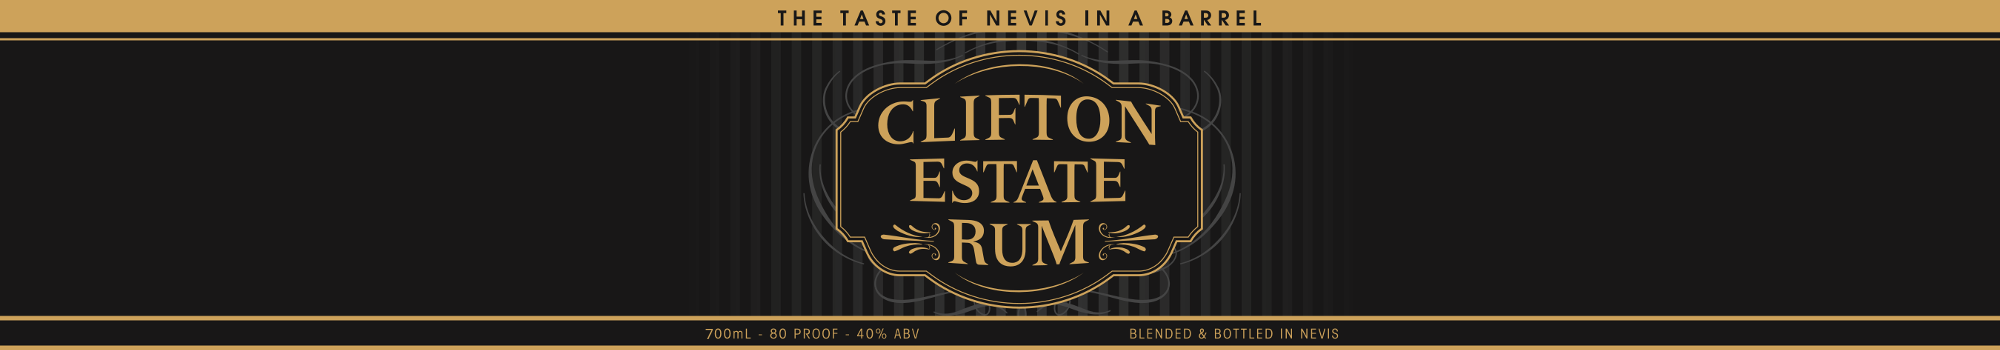 Clifton Estate Rum - Small Batch Artisanal Rum From St Kitts & Nevis West Indies